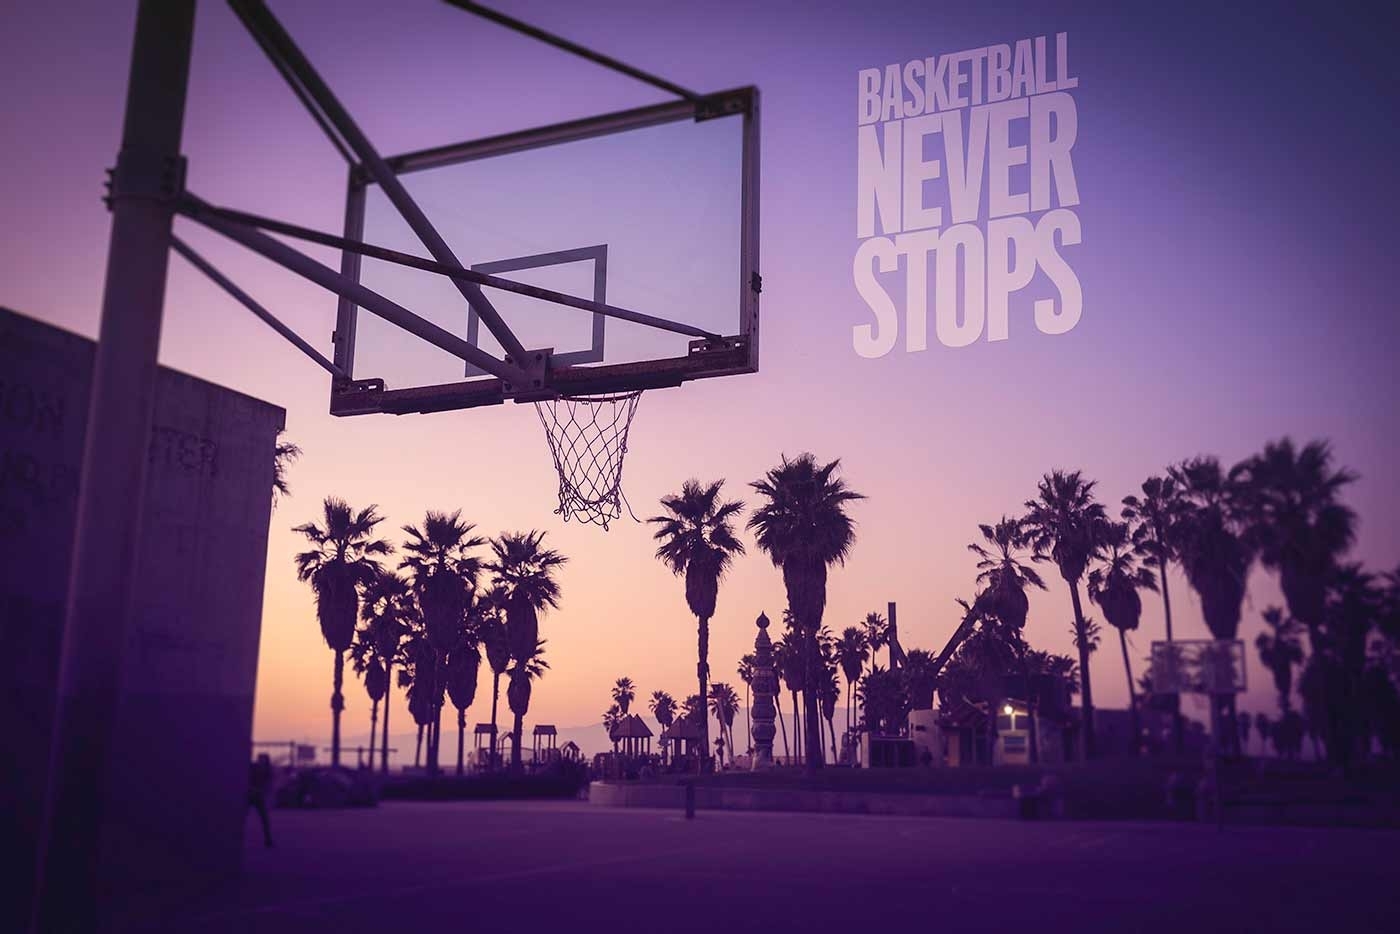 10 Top And Latest Basketball Never Stops Wallpaper for Desktop with FULL HD...